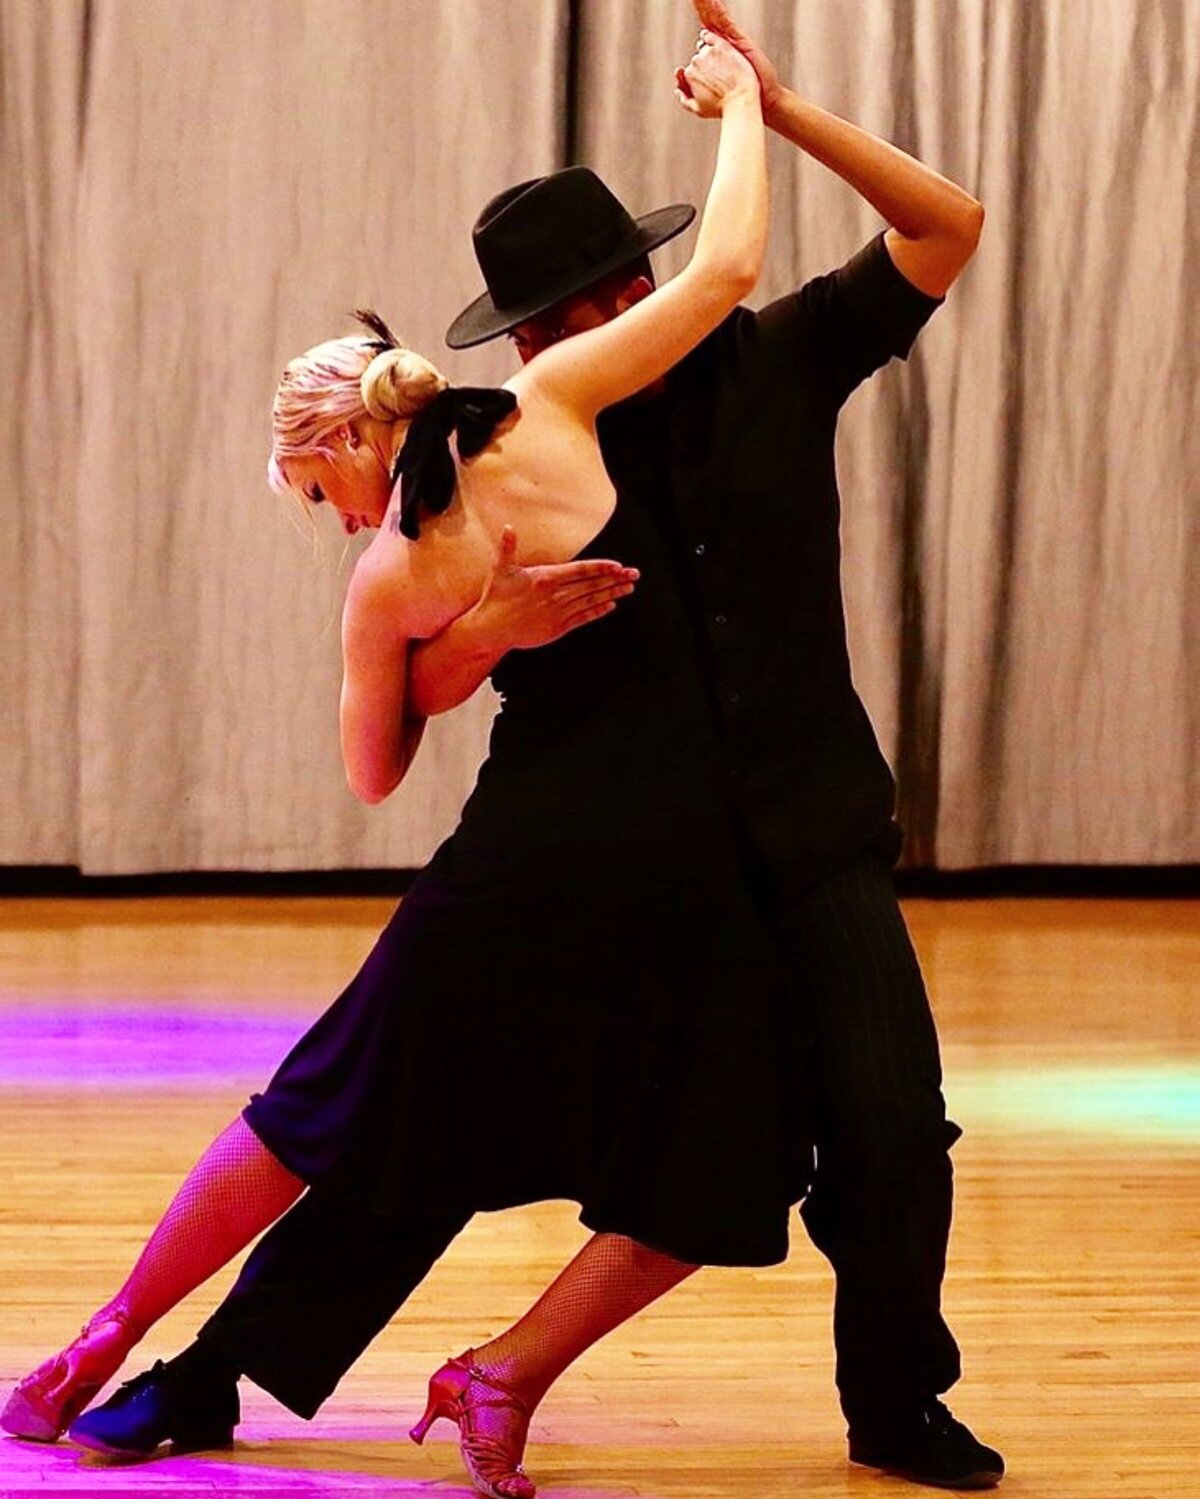 Dance competitors during a dance competition.